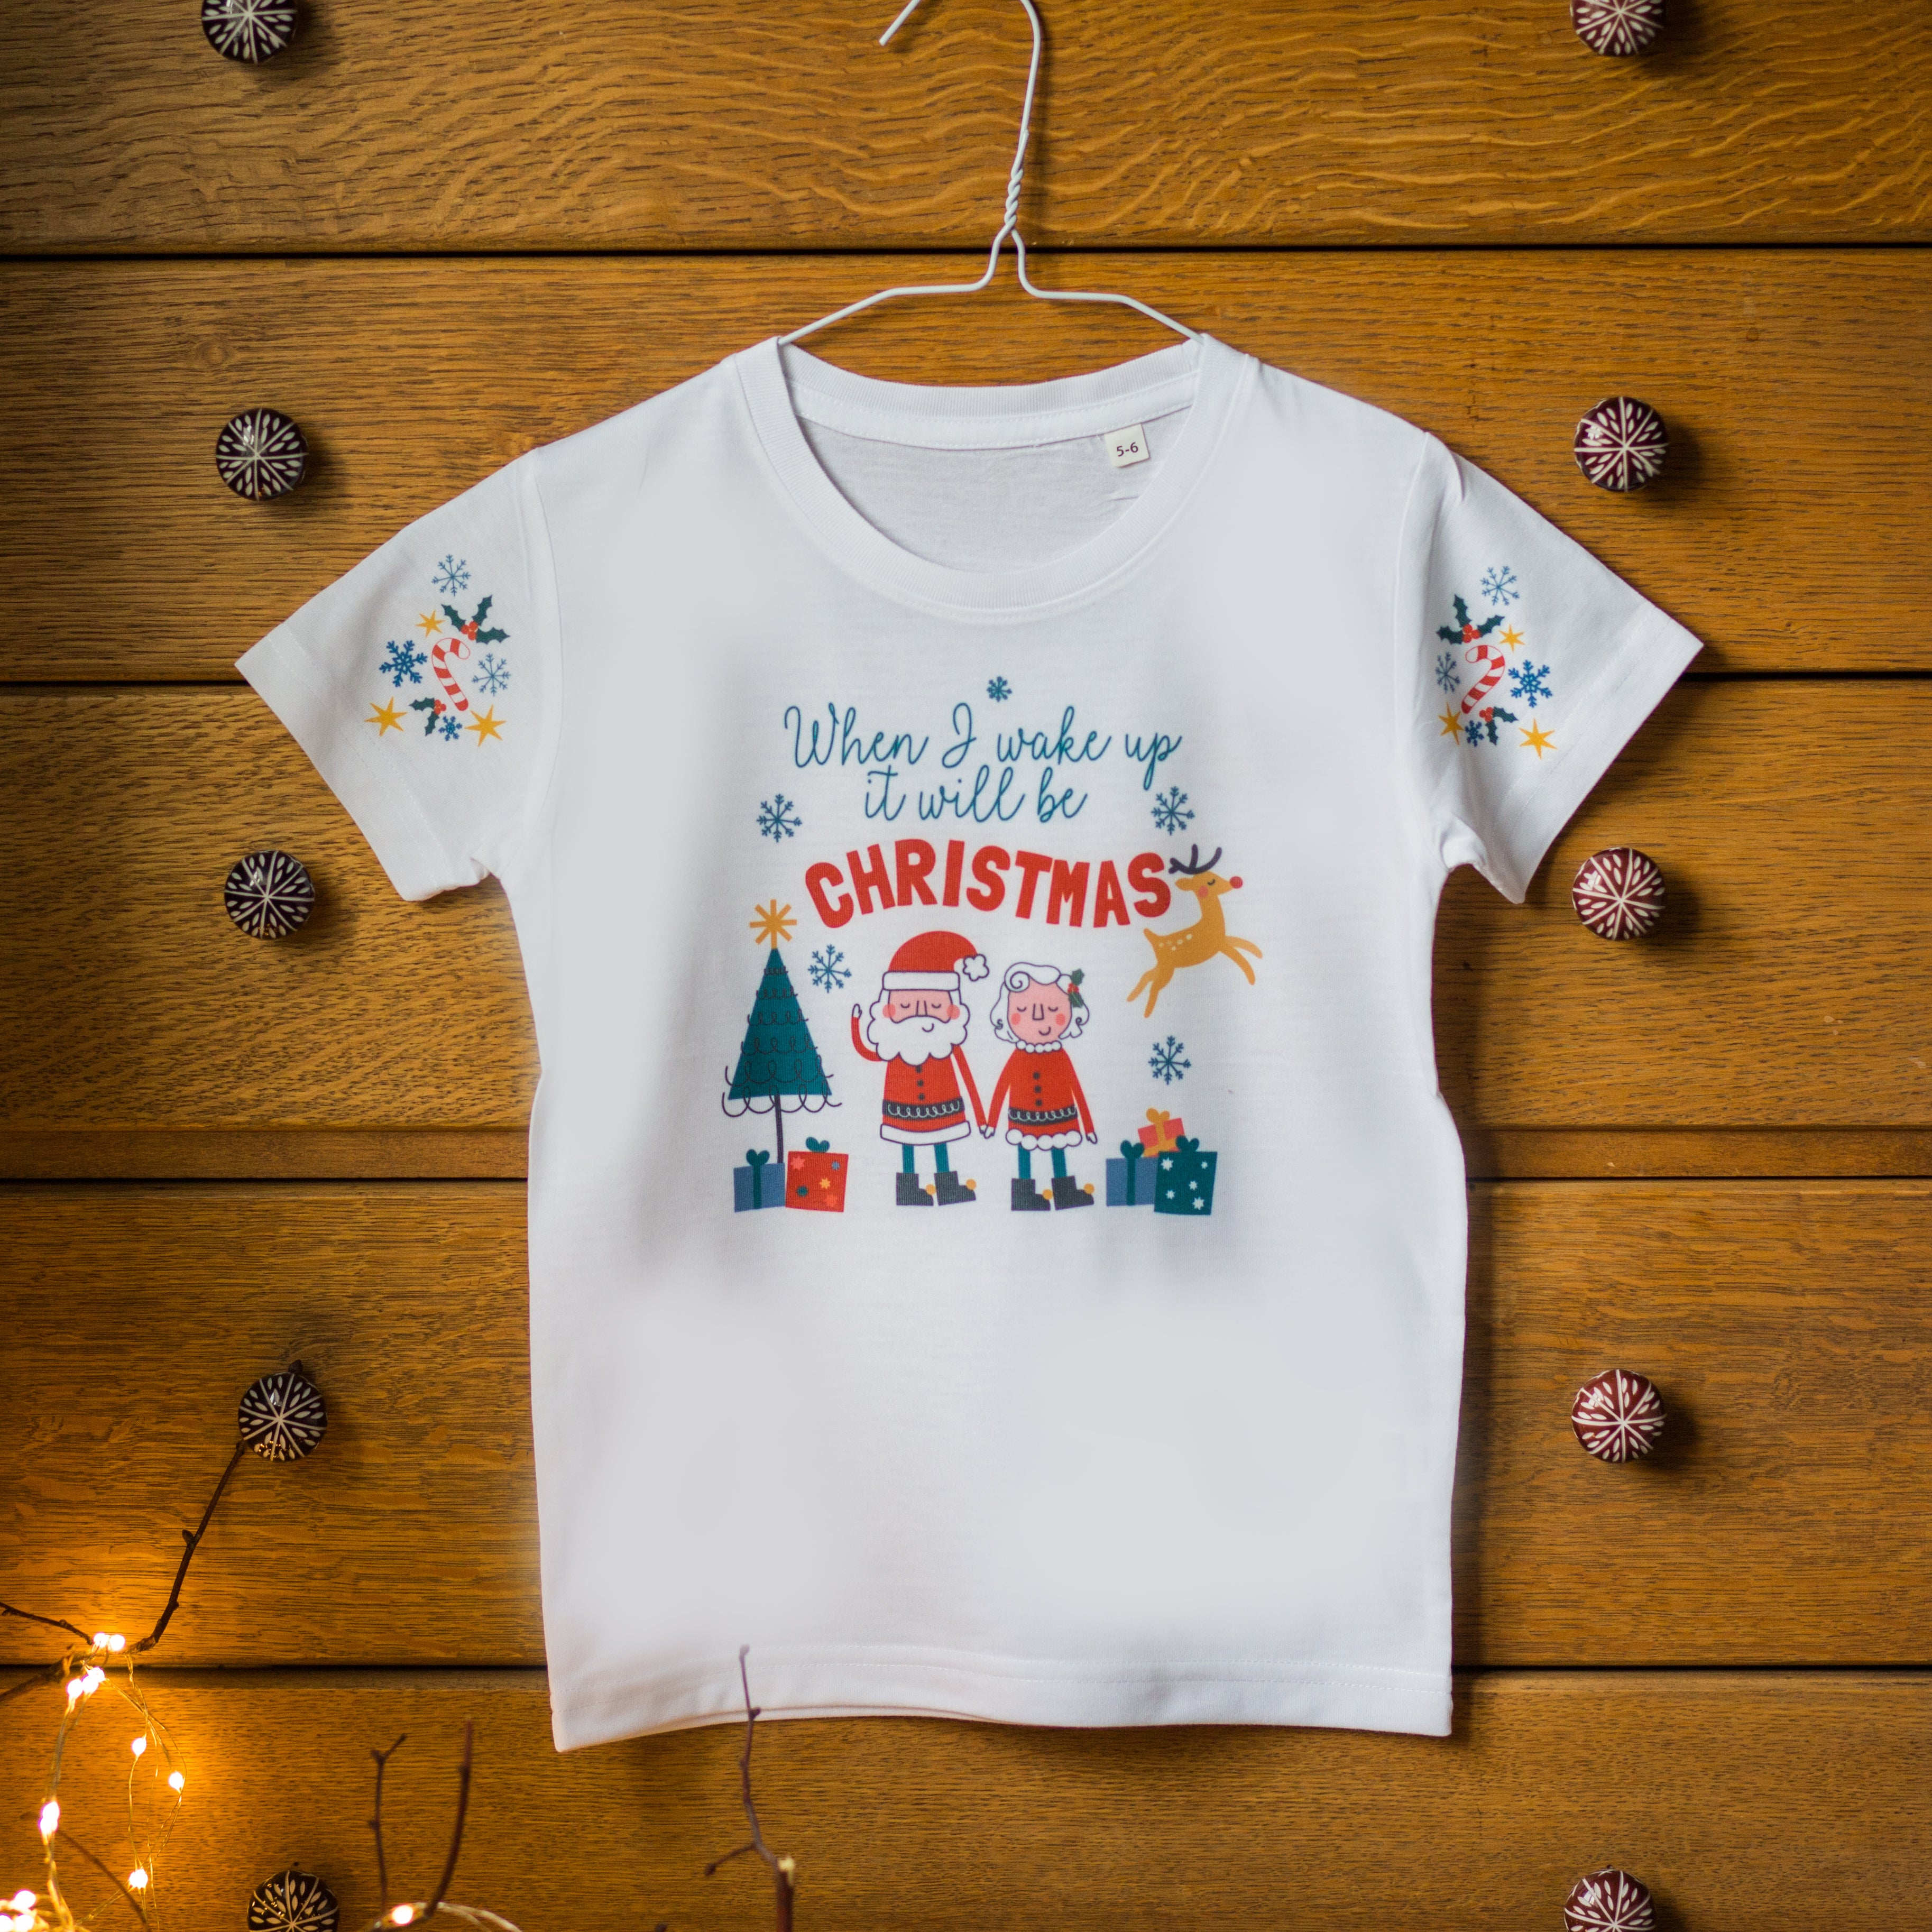 Mr and Mrs Clause 'When I Wake Up It Will Be Christmas' Tee